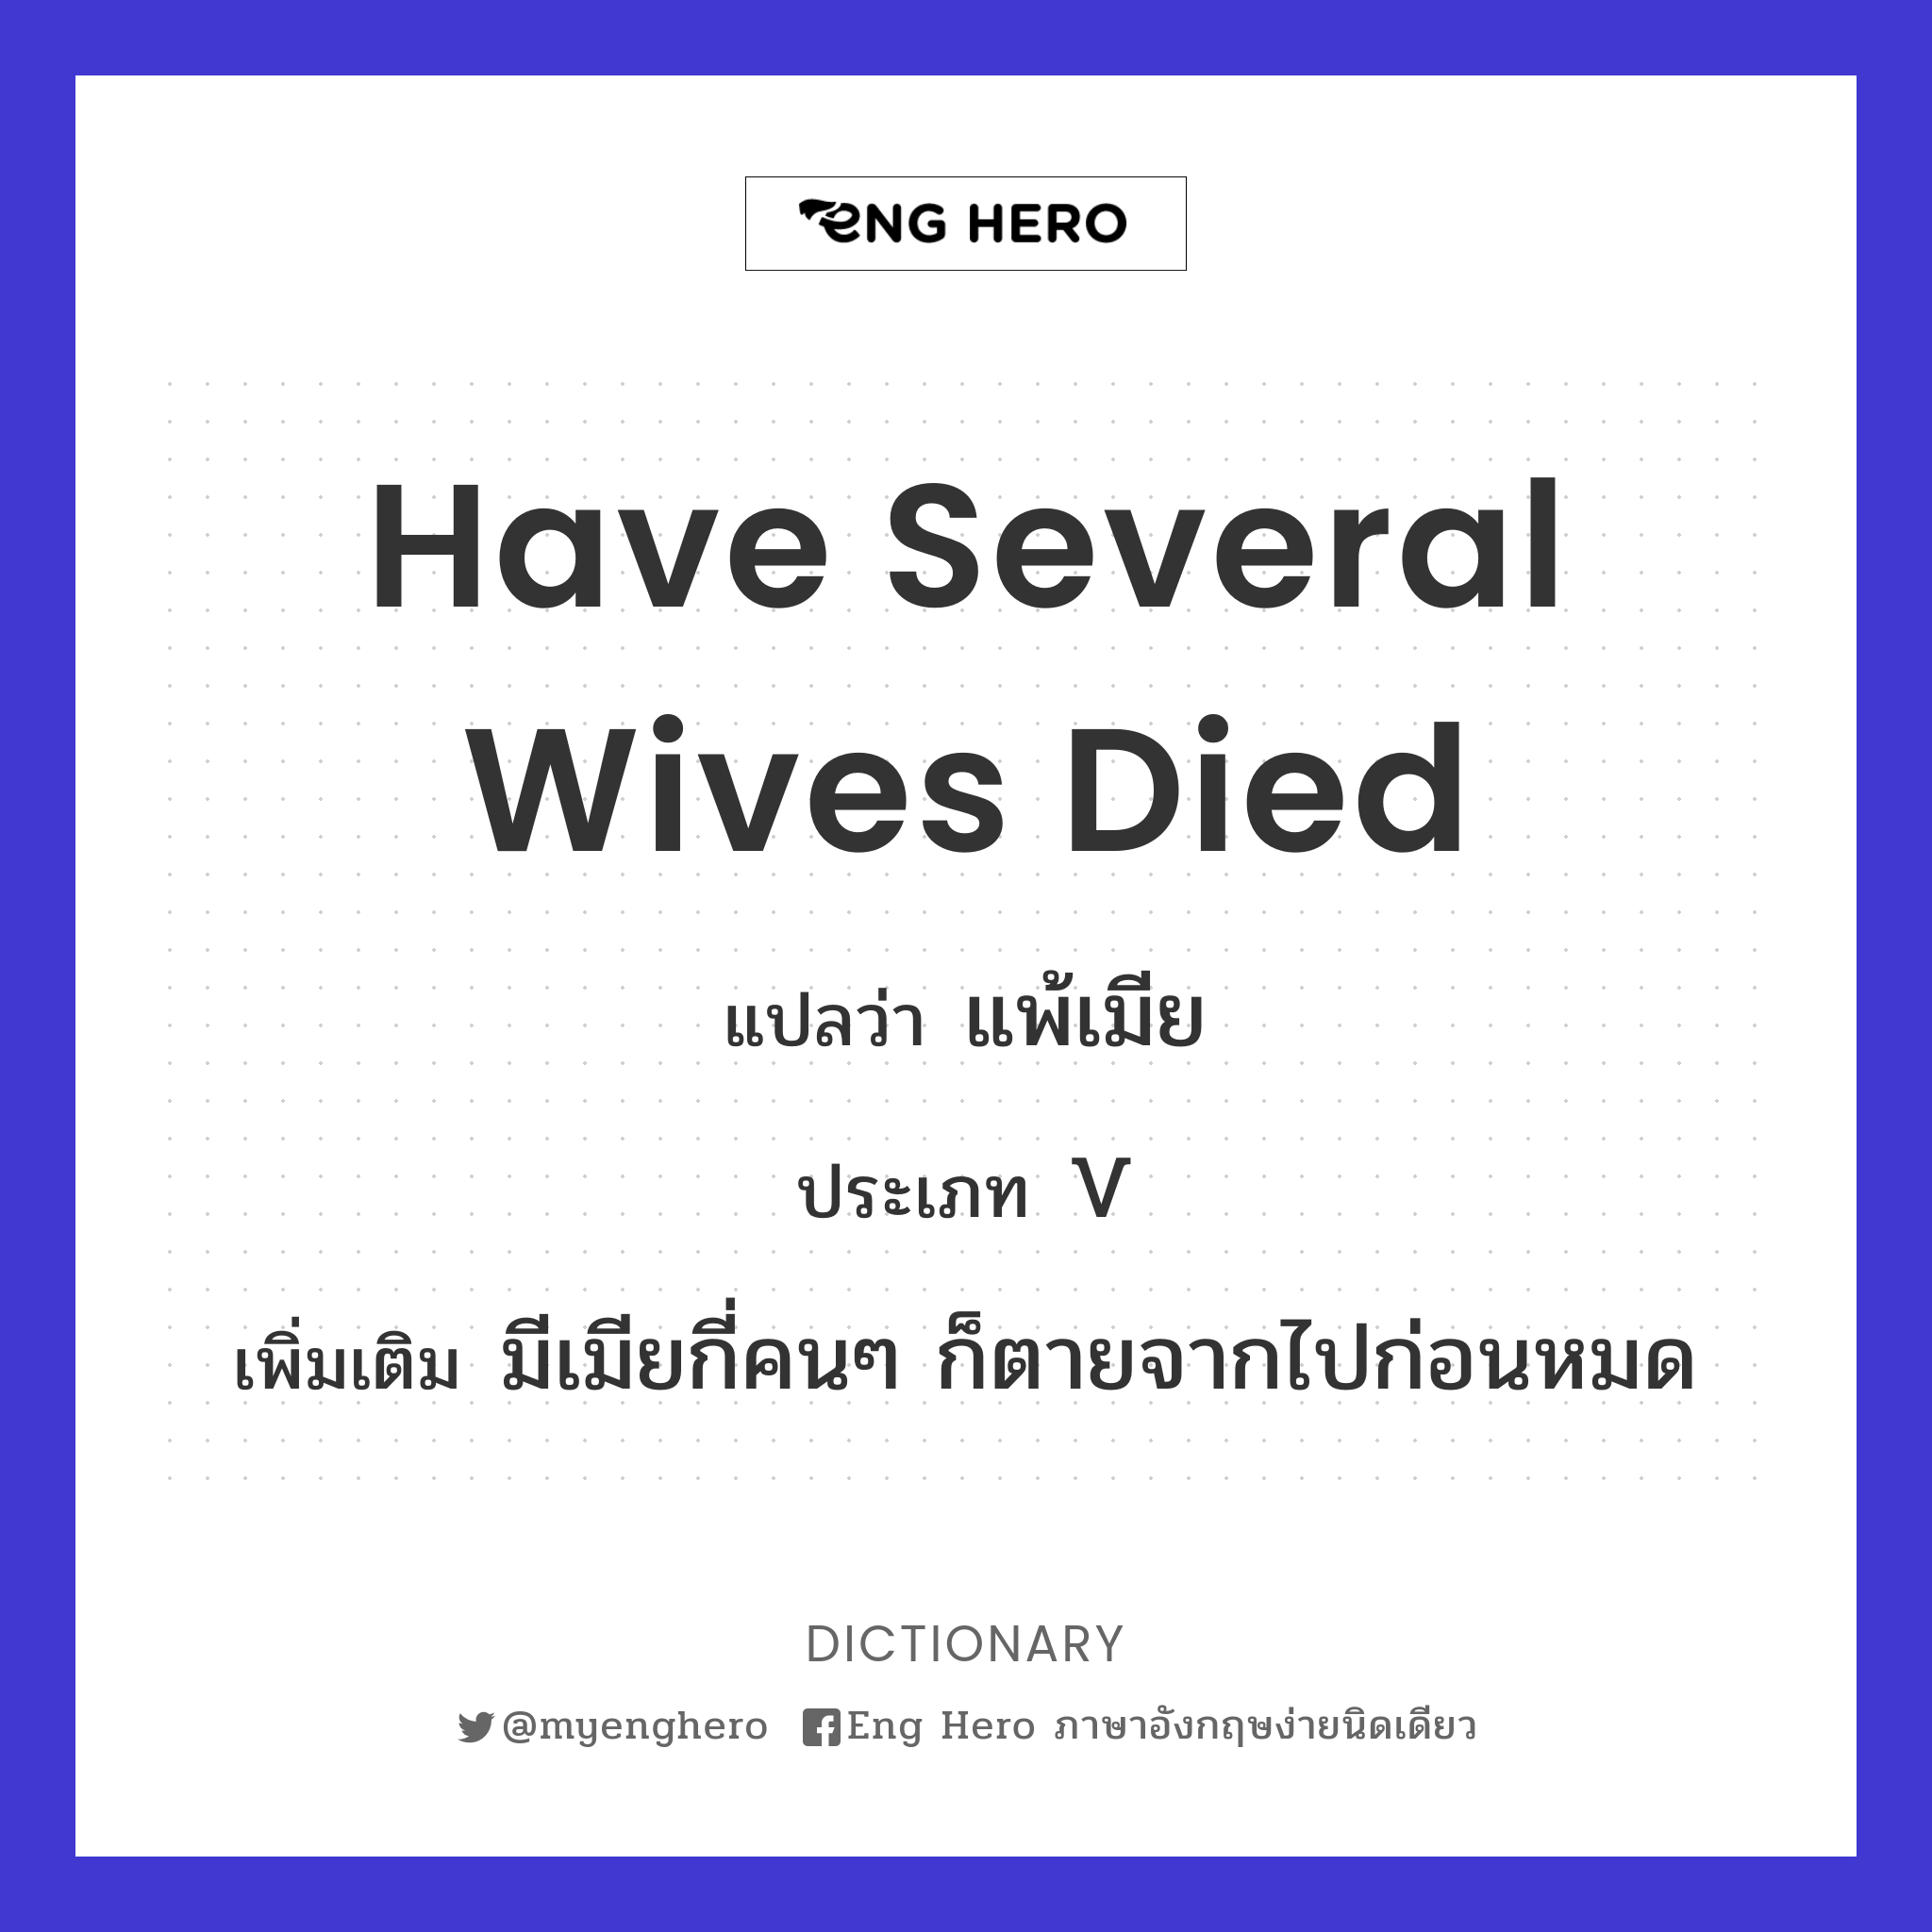 have several wives died